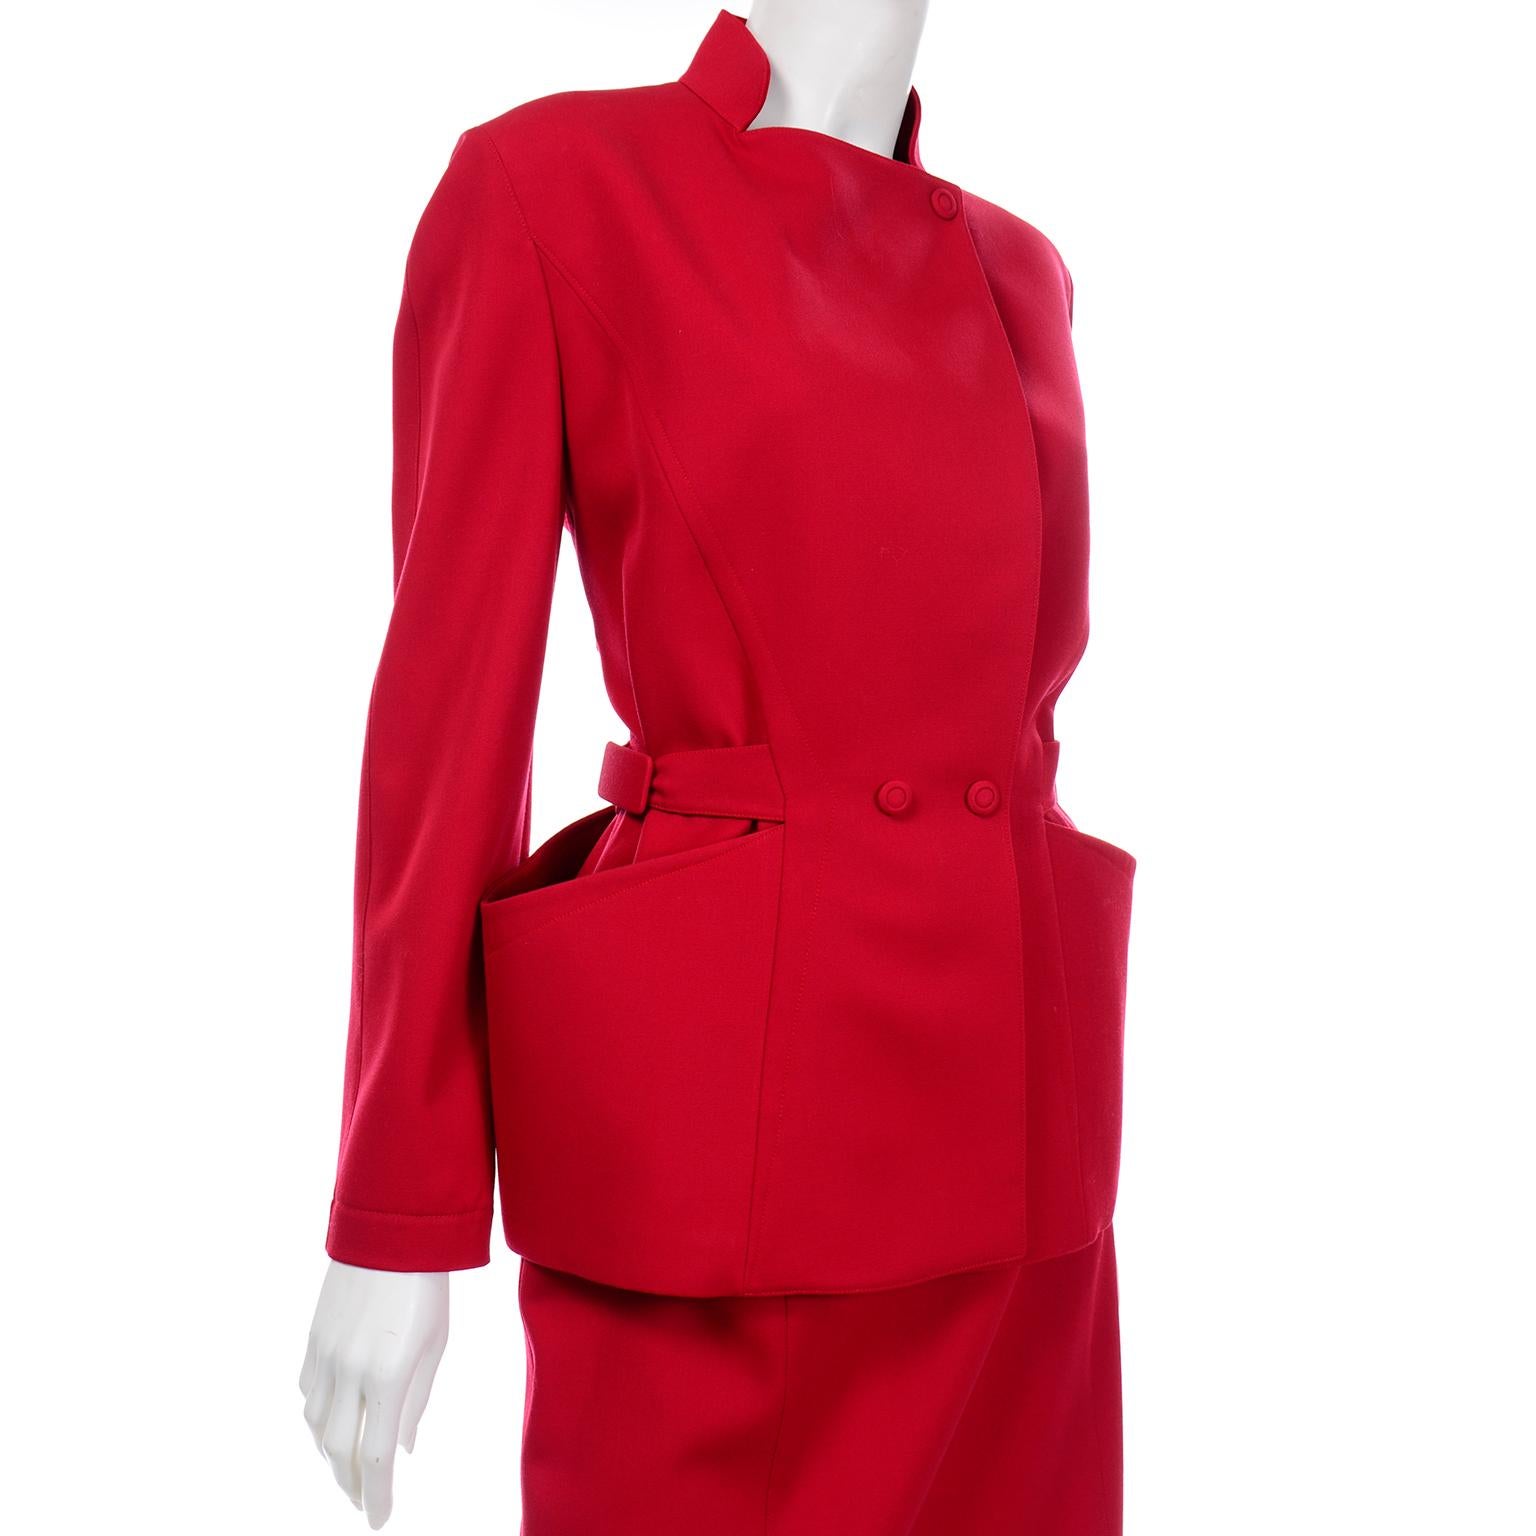 Vintage Thierry Mugler Paris Cherry Red Wool Skirt and Jacket Suit For ...